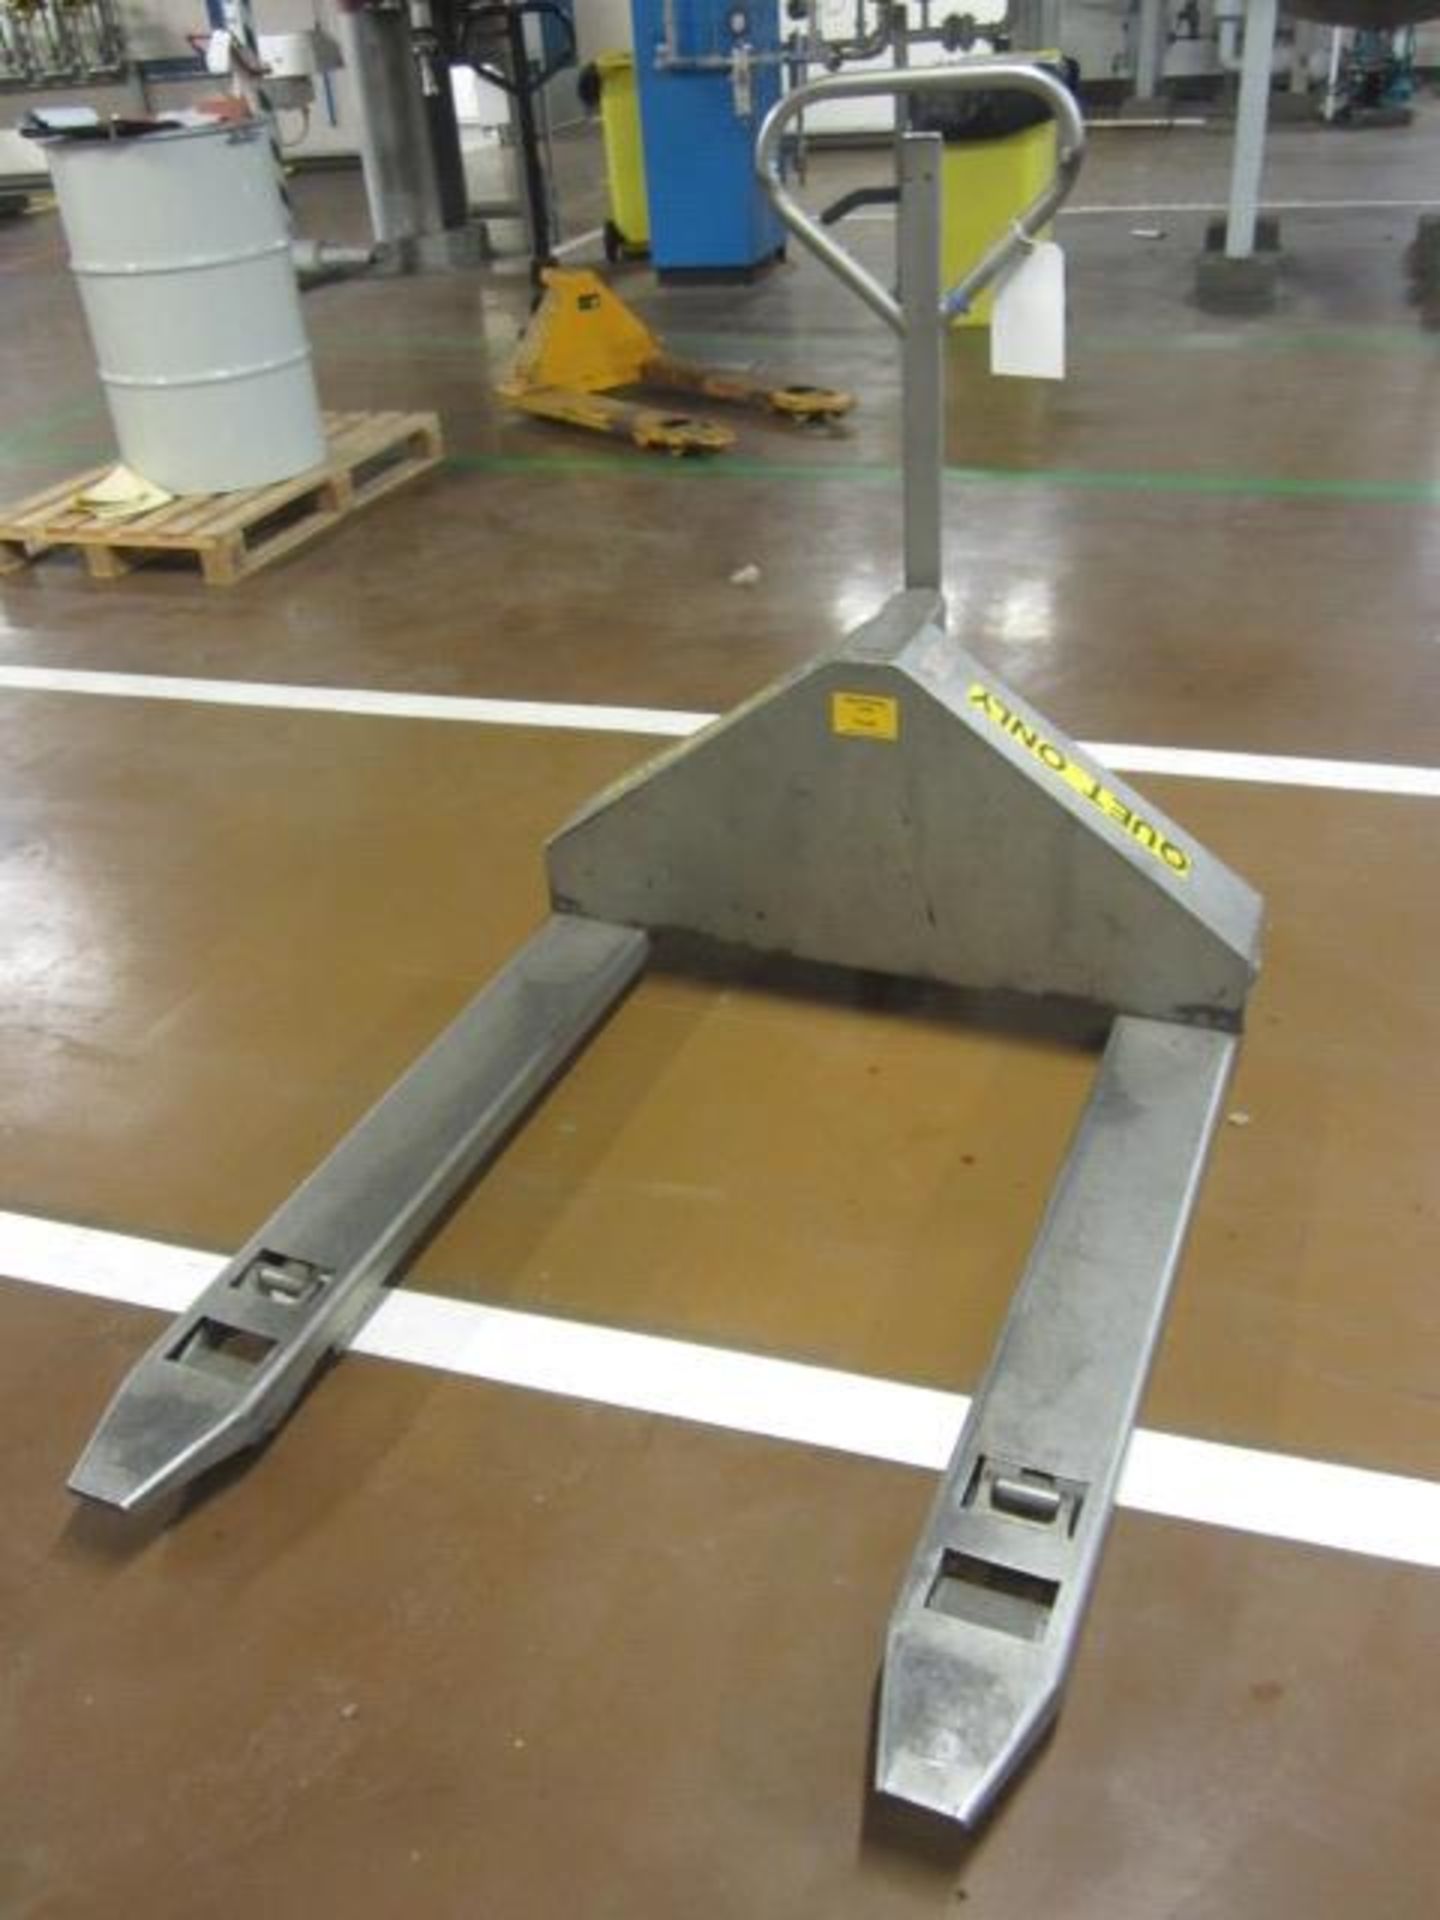 Polymathic extra width hydraulic pallet truck, SWL 1000kg - Image 2 of 3